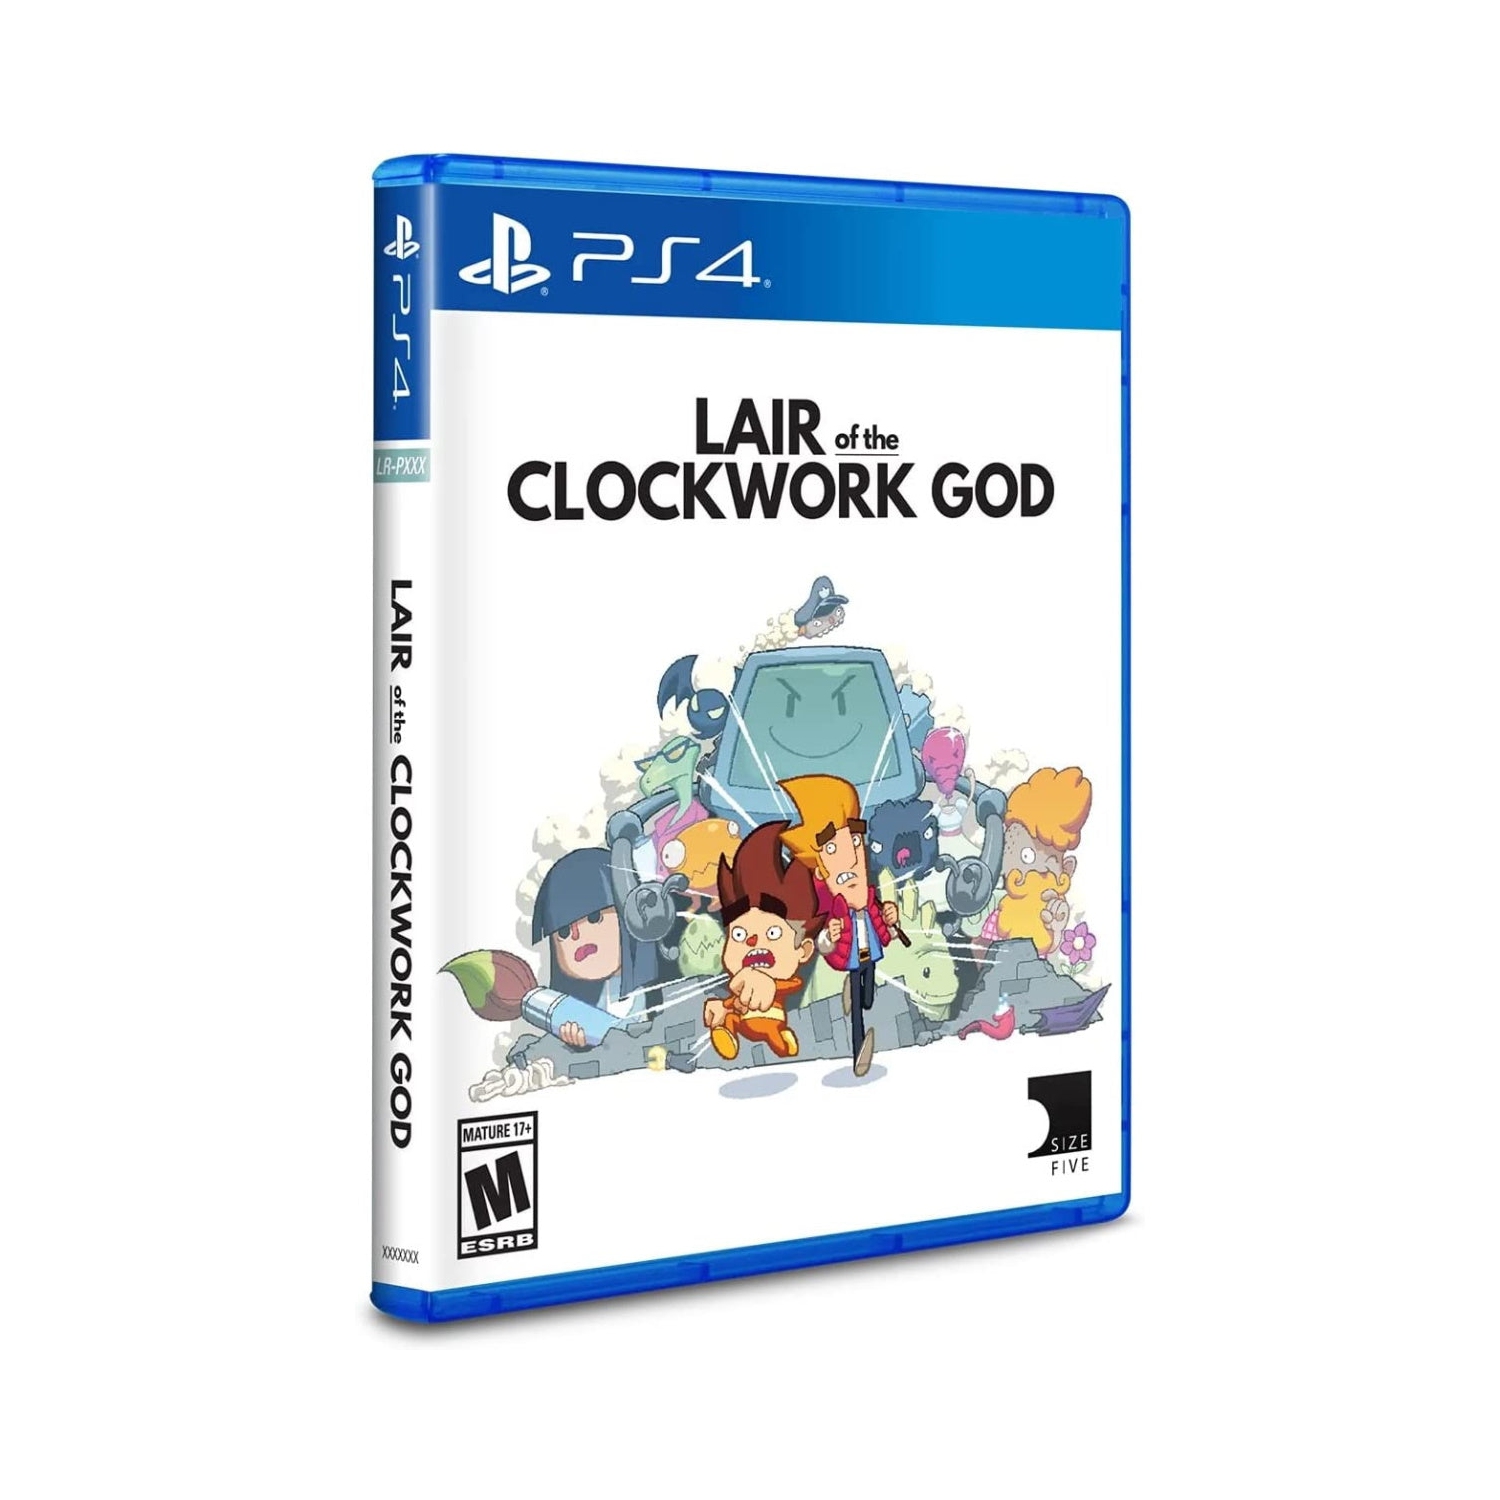 Lair of the Clockwork God - Limited Run #437 [PlayStation 4]